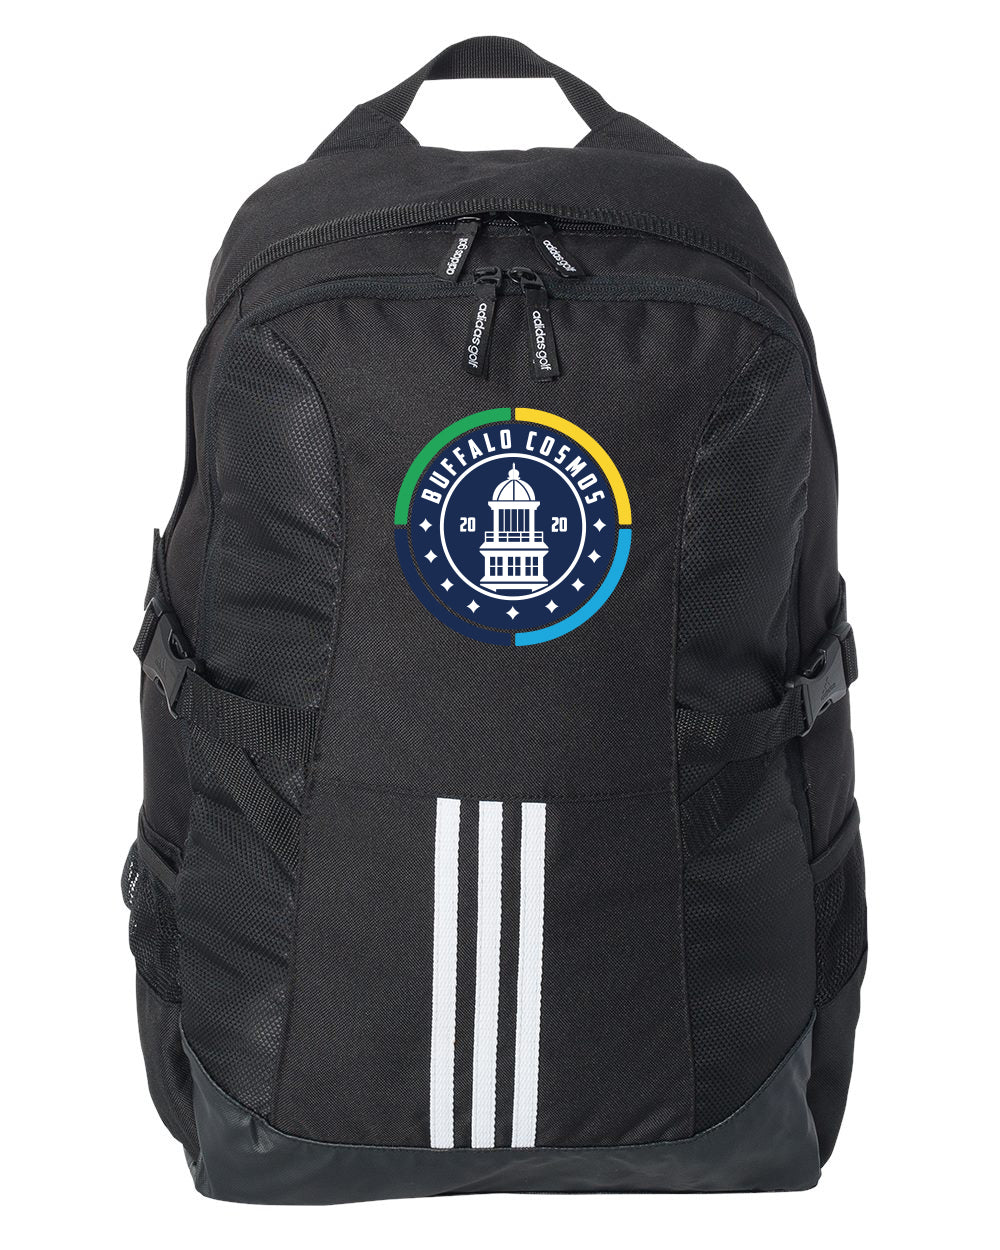 Cosmos Adidas 26L Backpack - Redwolf Jersey Works